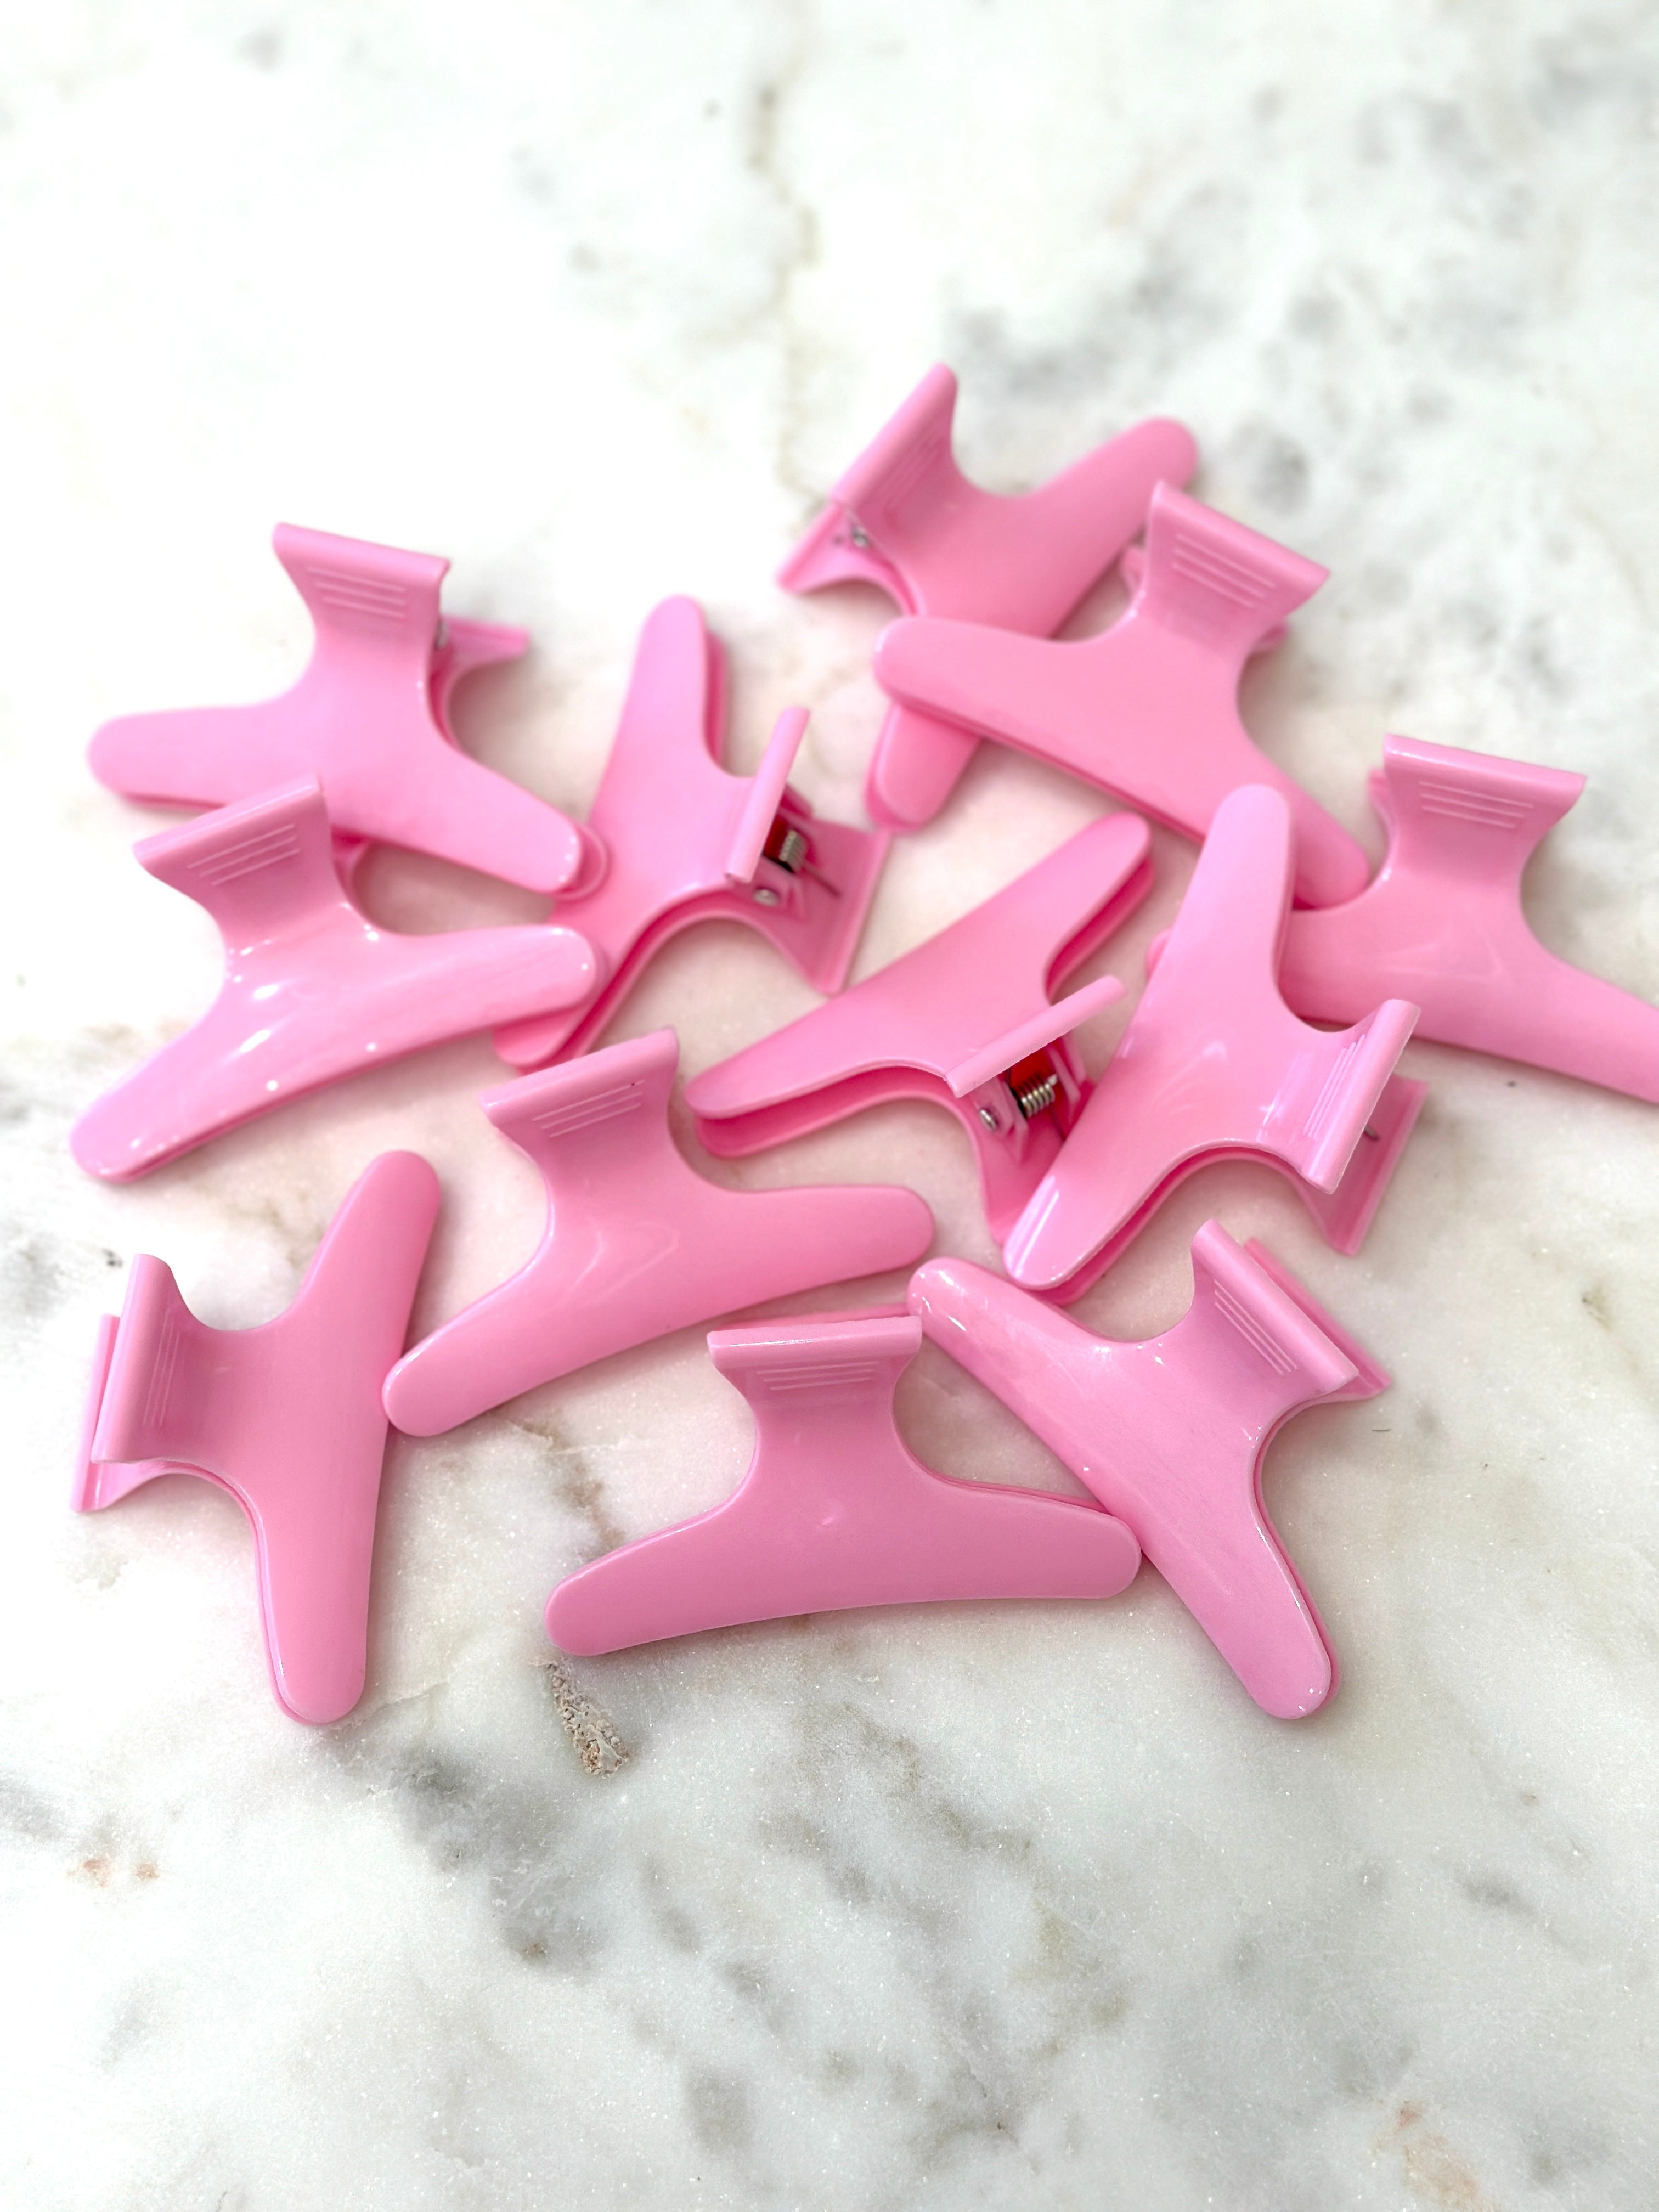 Pink Hair Styling Clips - S.Adams Collection